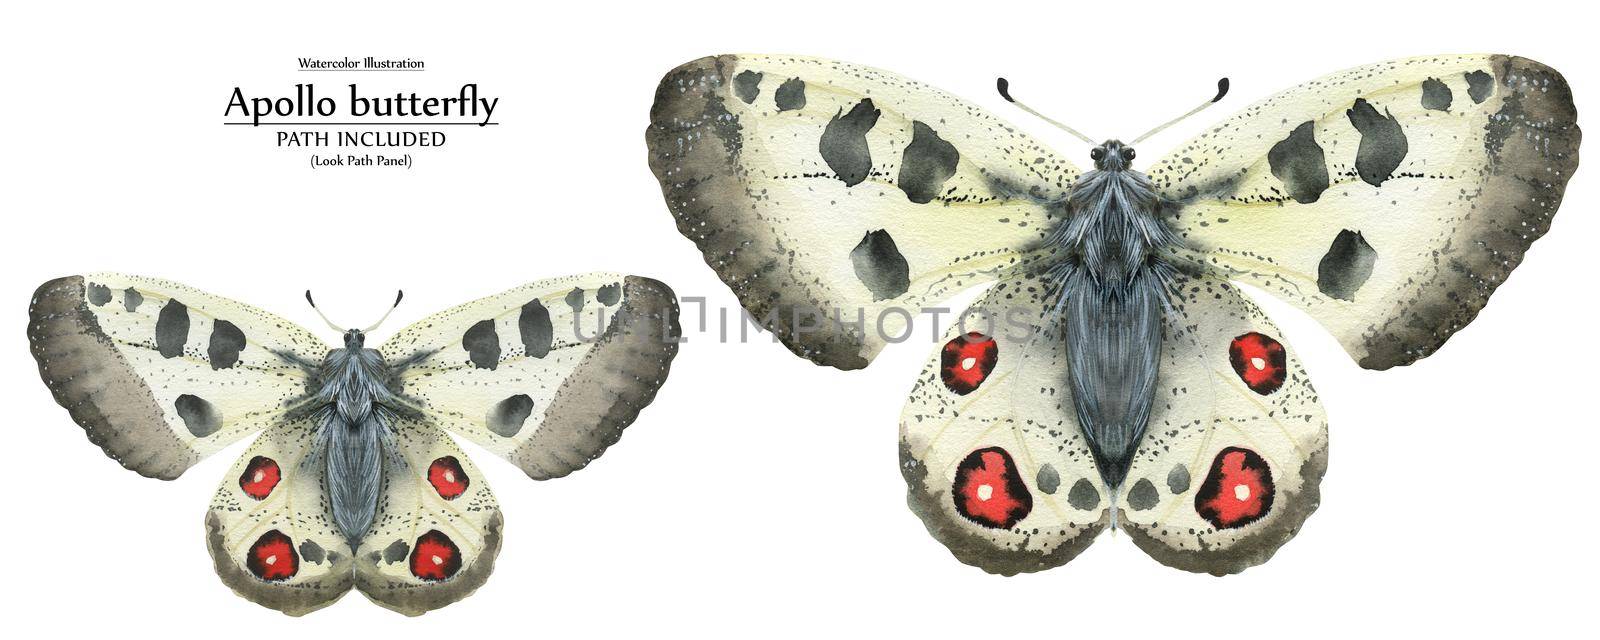 White butterfly Apollo by watercolor. Realistic illustration of wild nature. Isolated, path included